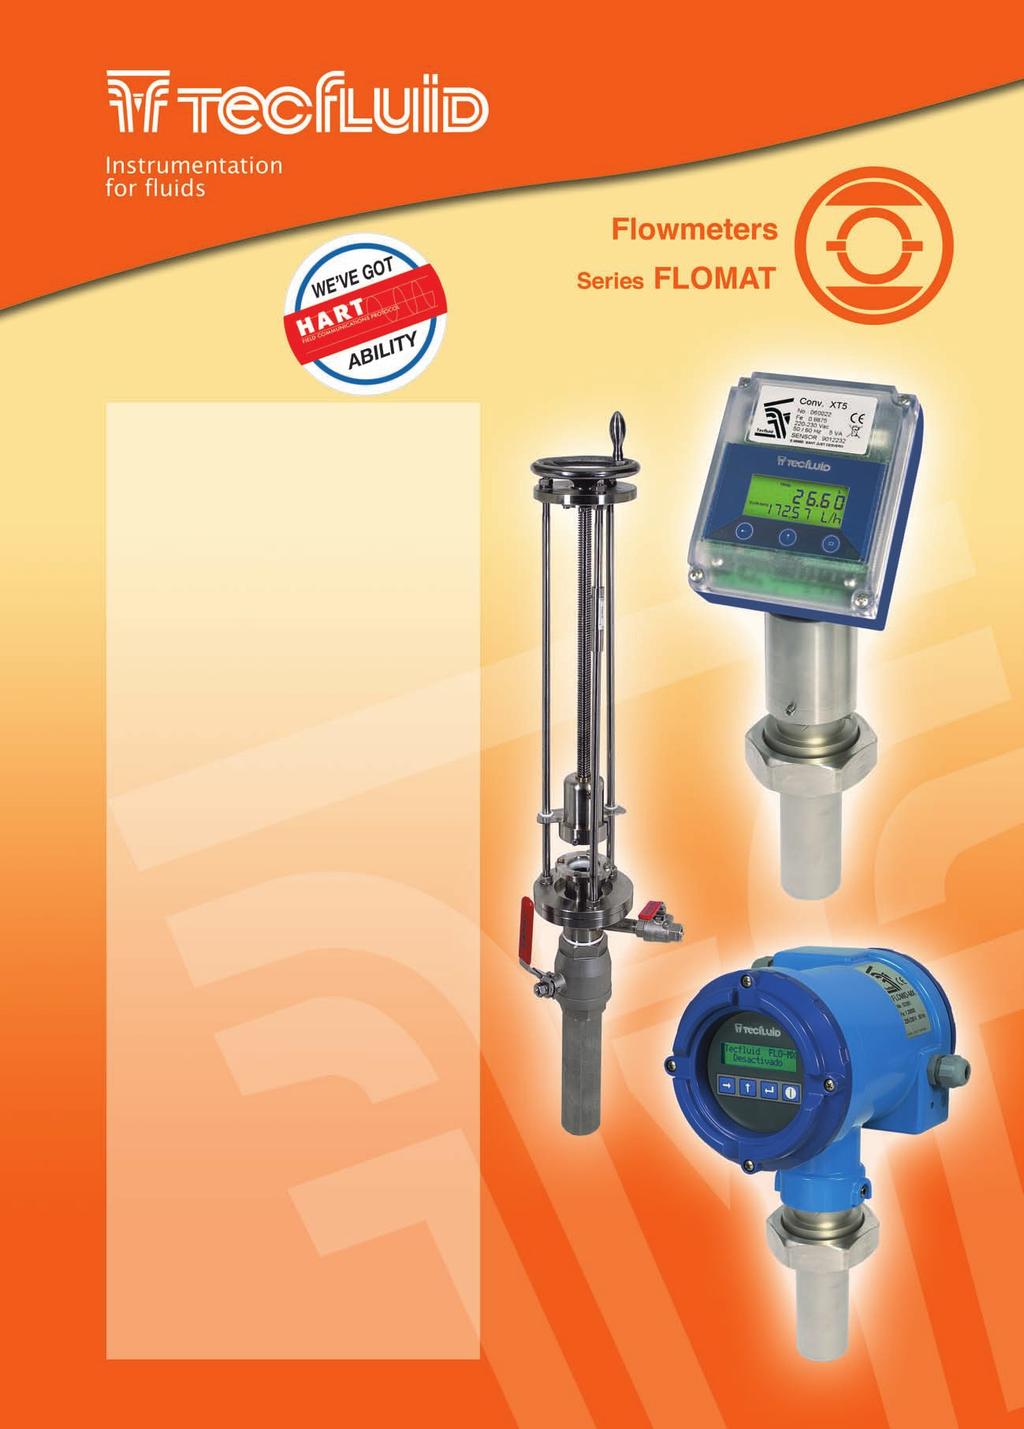 LOMAT Electromagnetic Insertion lowmeter Working pressure manufacturing according to PED 97/23/CE (Lloyd s Register Certificate Nº 031) Introduction or use in large diameter pipes or open channels as